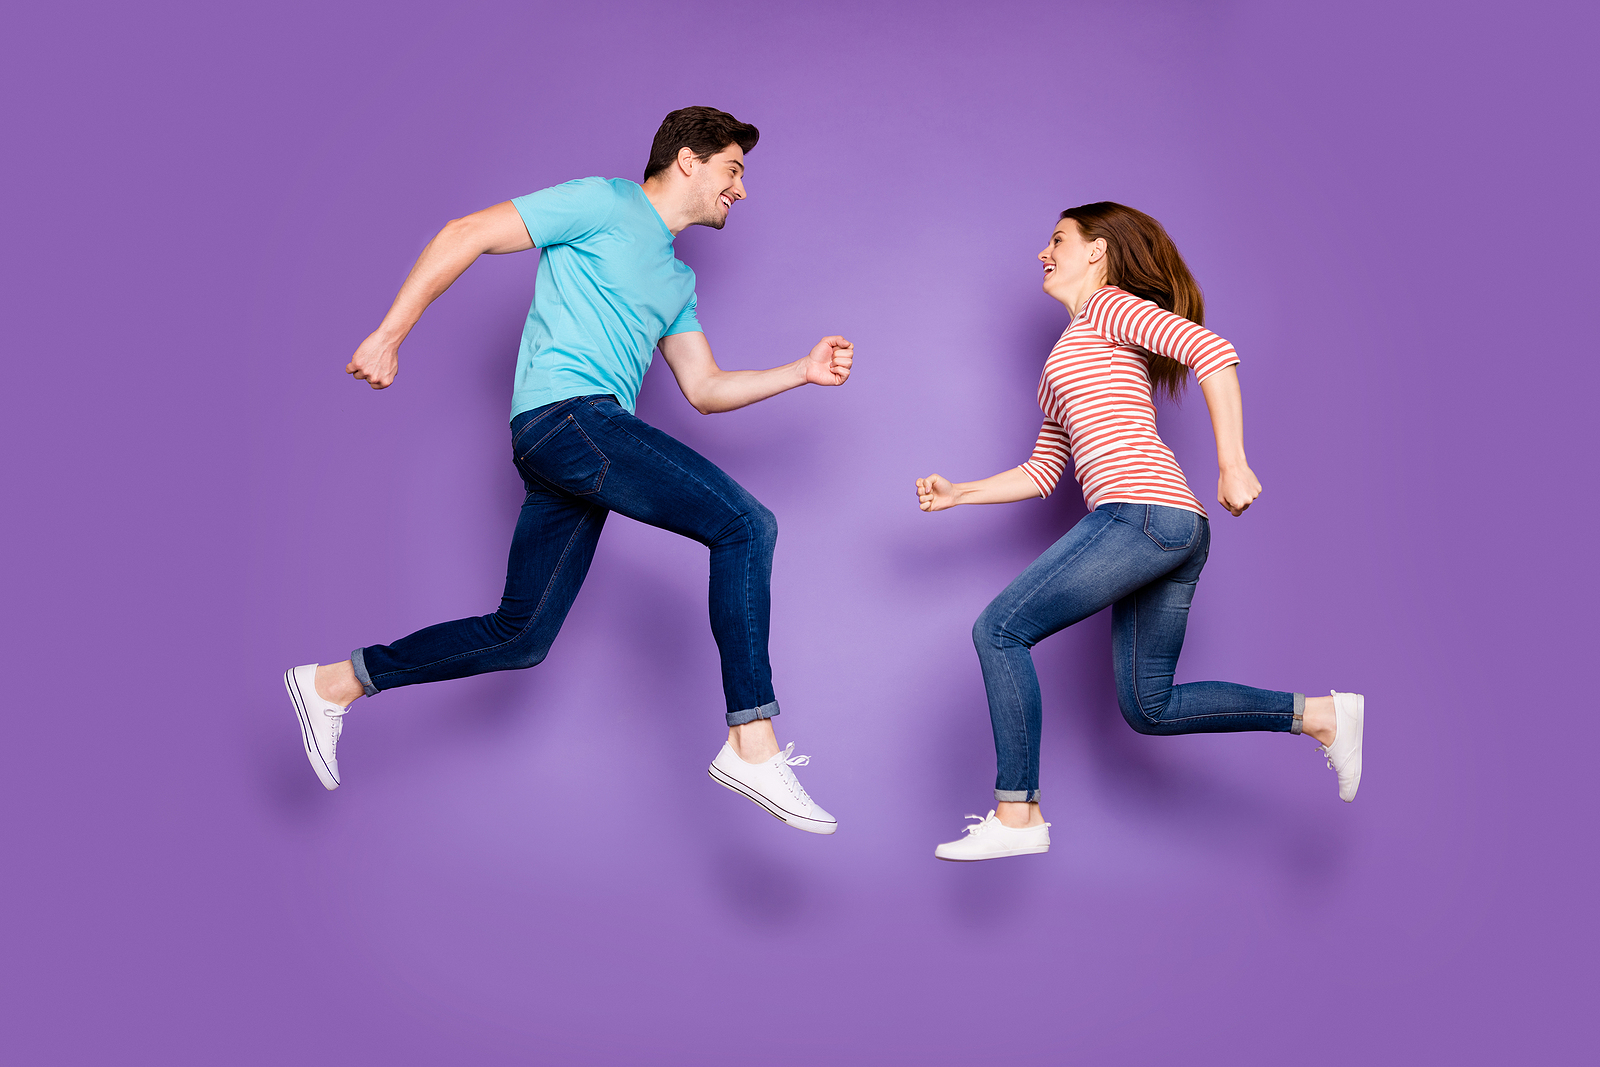 A man and a woman wearing blue and pink against a purple background, jumping high in the air looking at eachother and smiling.